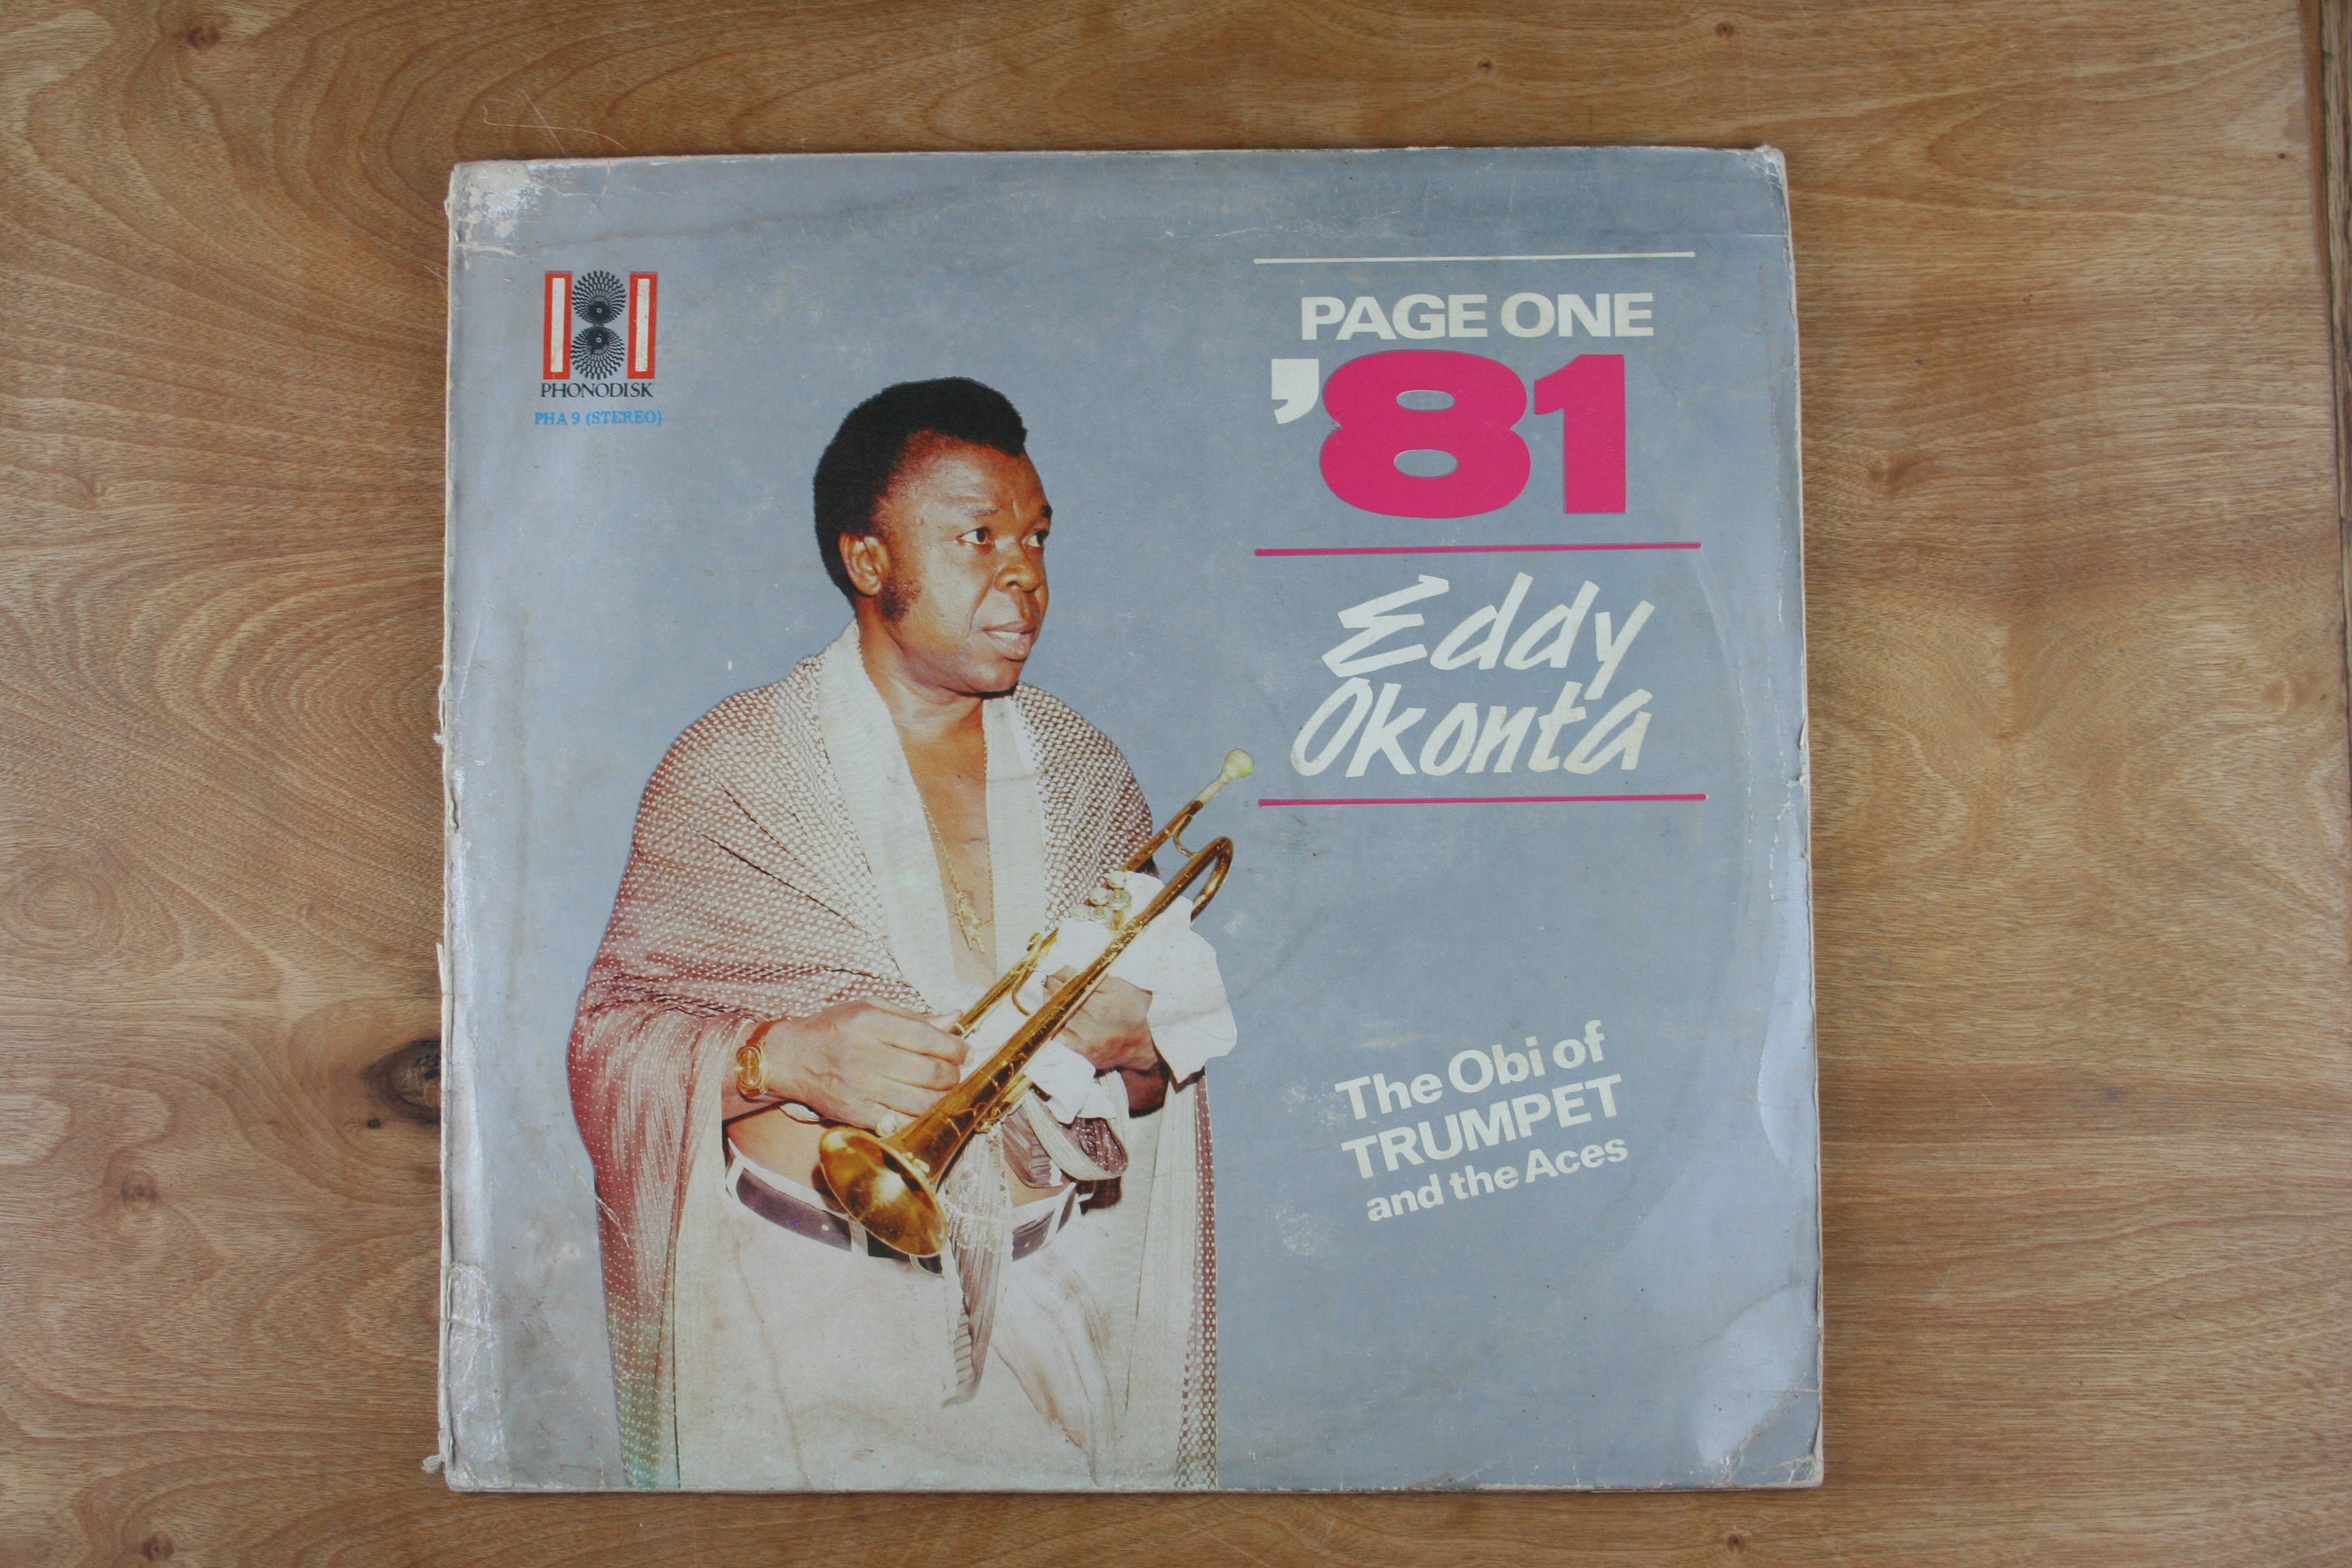 Eddy Okonta "The Obi Of Trumpet And The Aces" ‎– Page '81